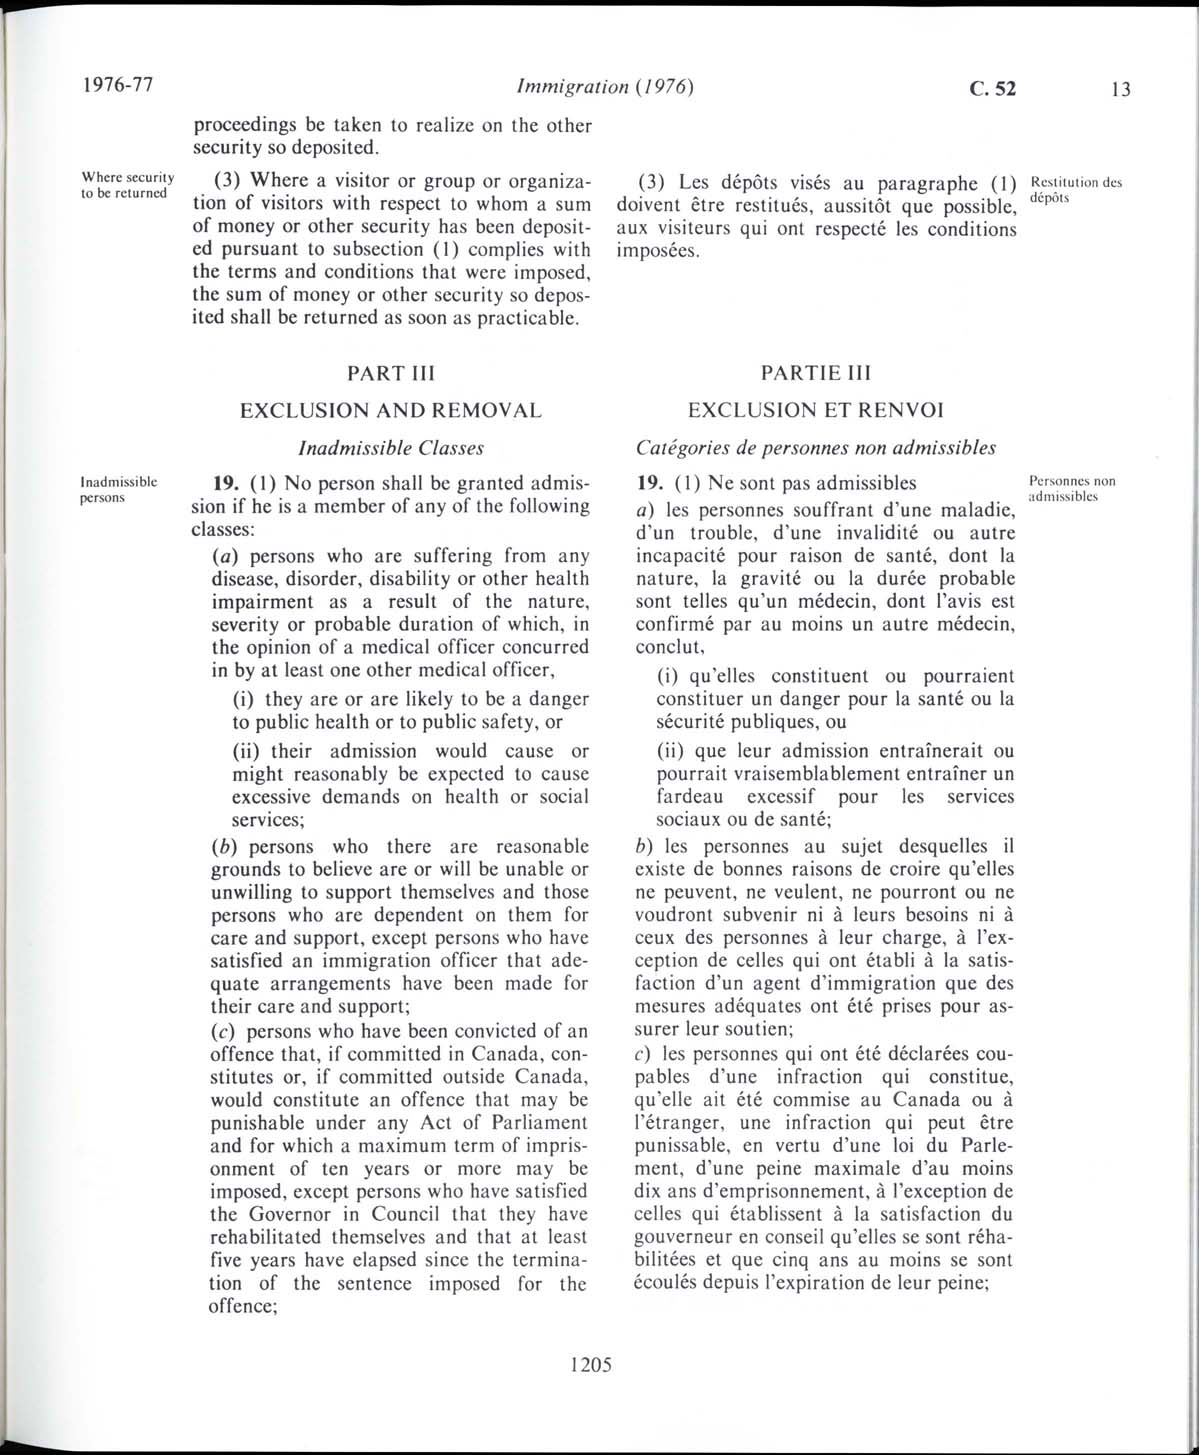 Page 1205 Immigration Act, 1976